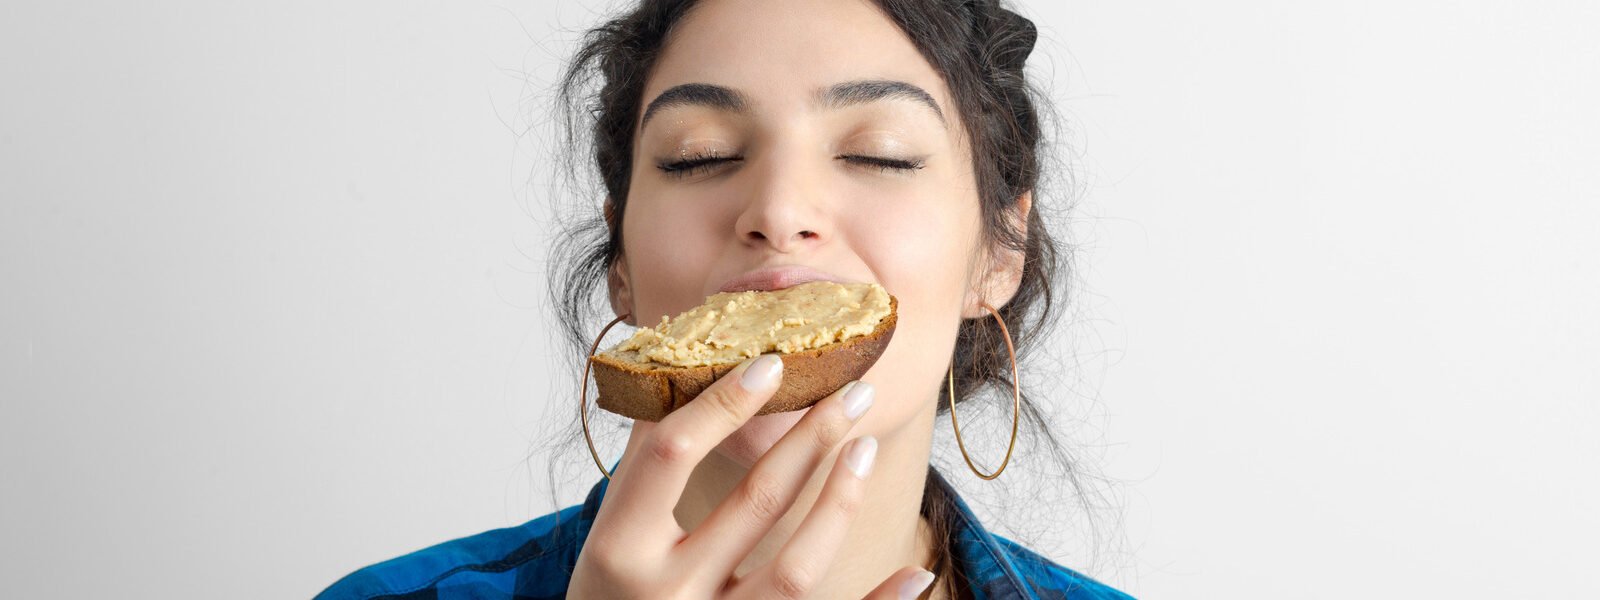 When You Eat Peanut Butter Every Day, This Is What Happens To Your Appetite - Health Digest